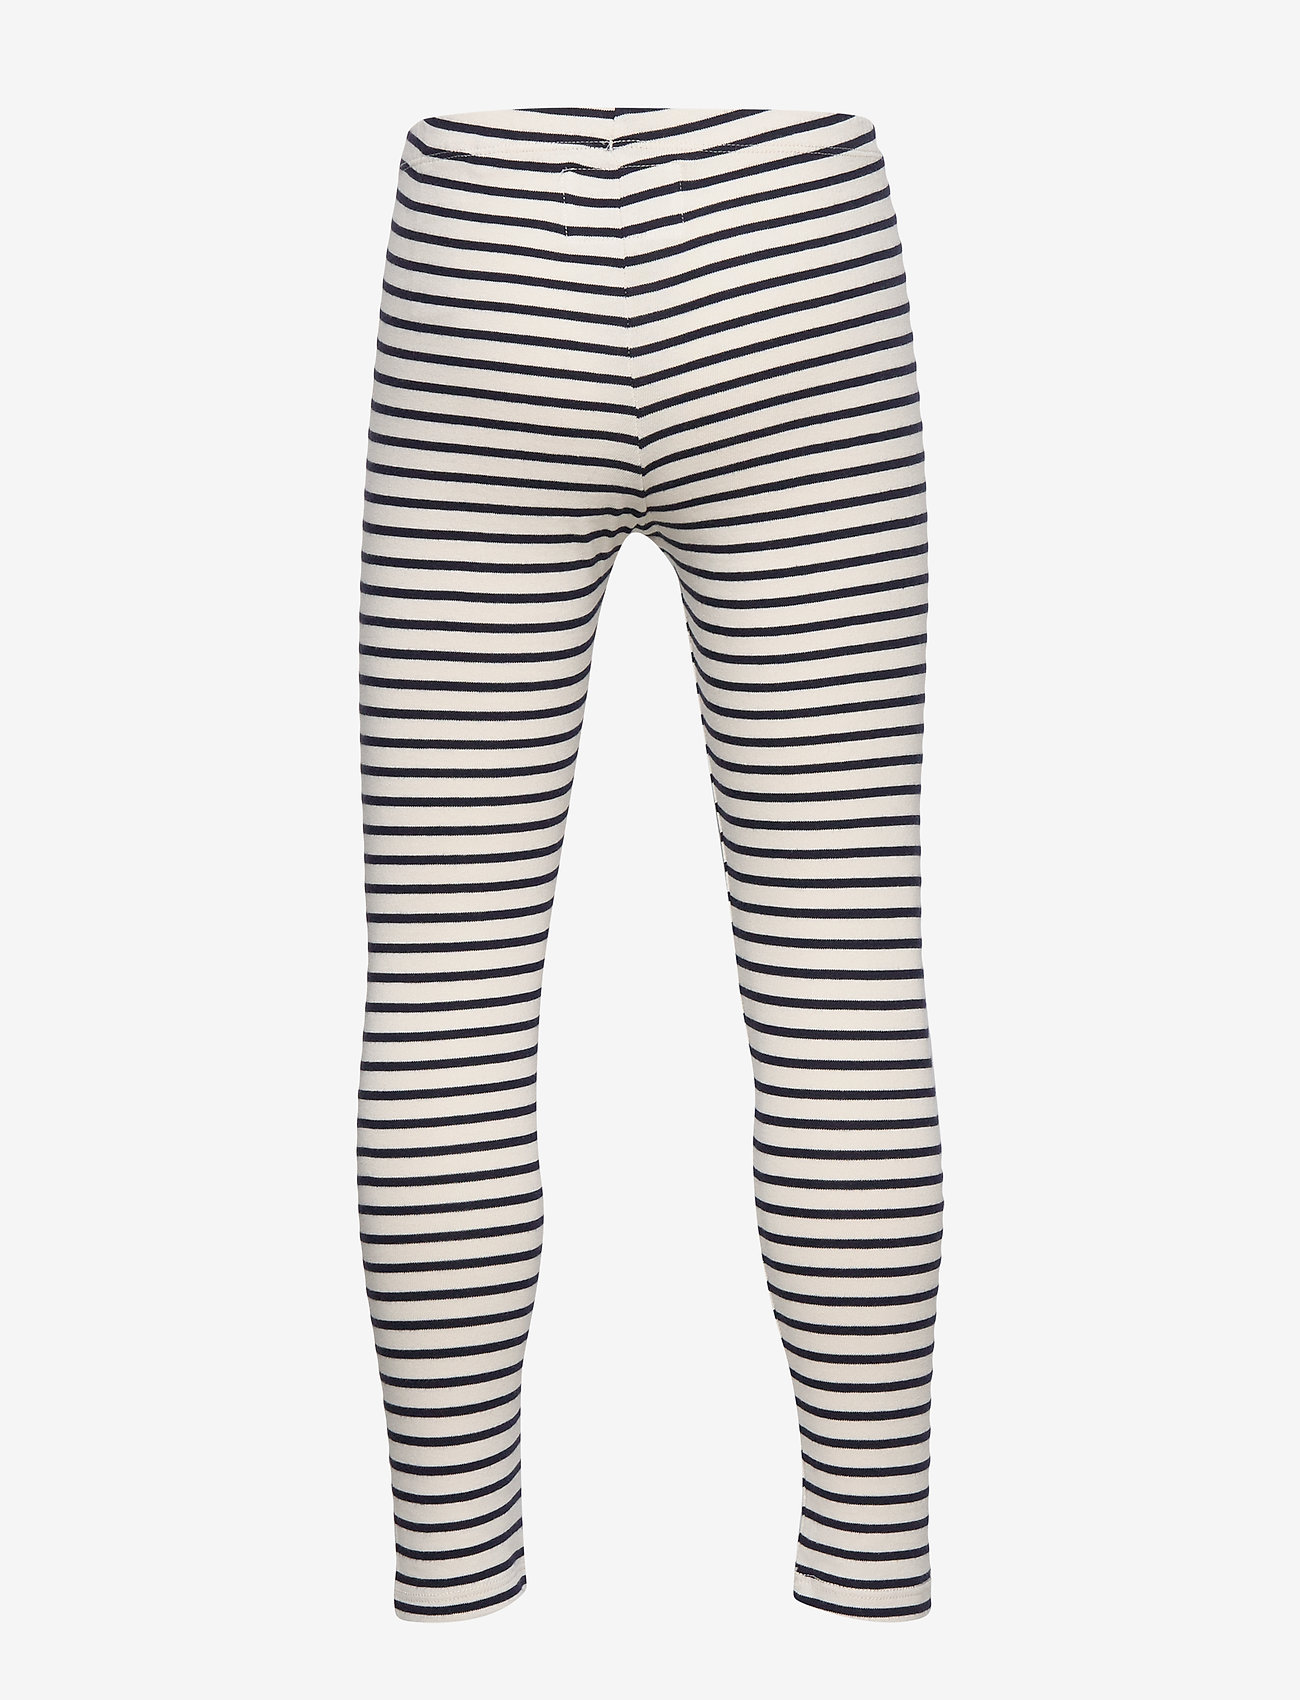 Wood Wood - Ira kids leggings - lowest prices - off-white/navy stripes - 1